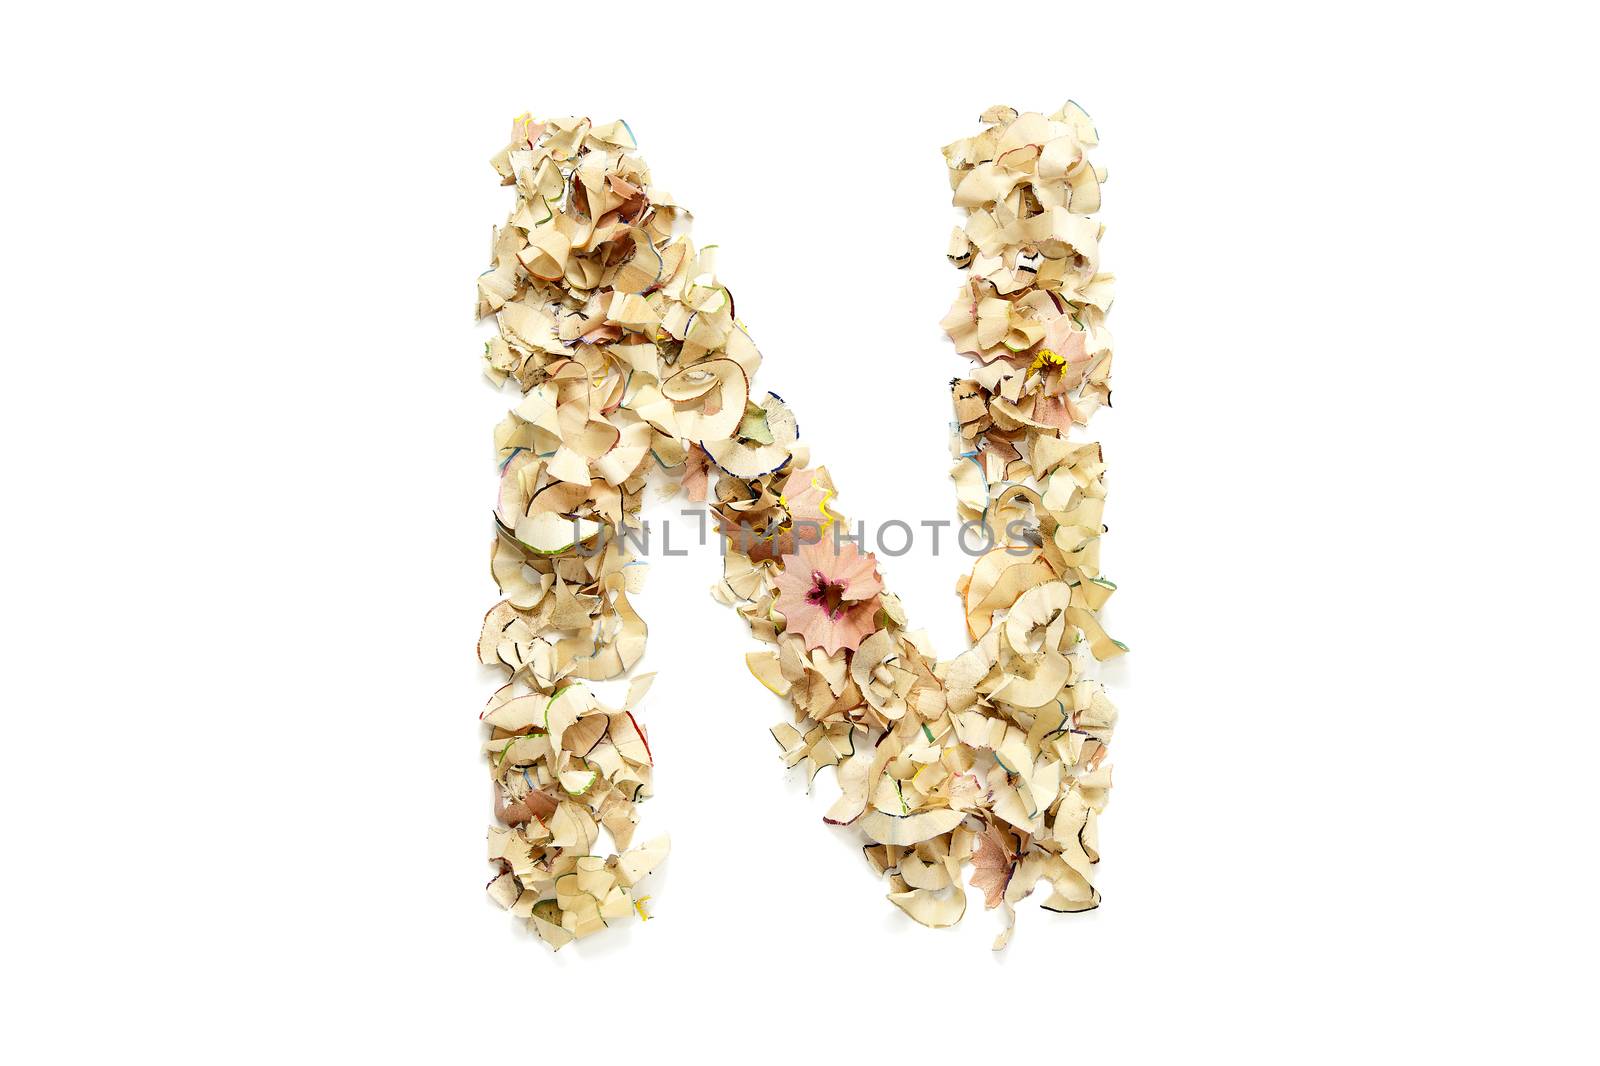 Letter N made from coloured pencil shavings for use in your design.